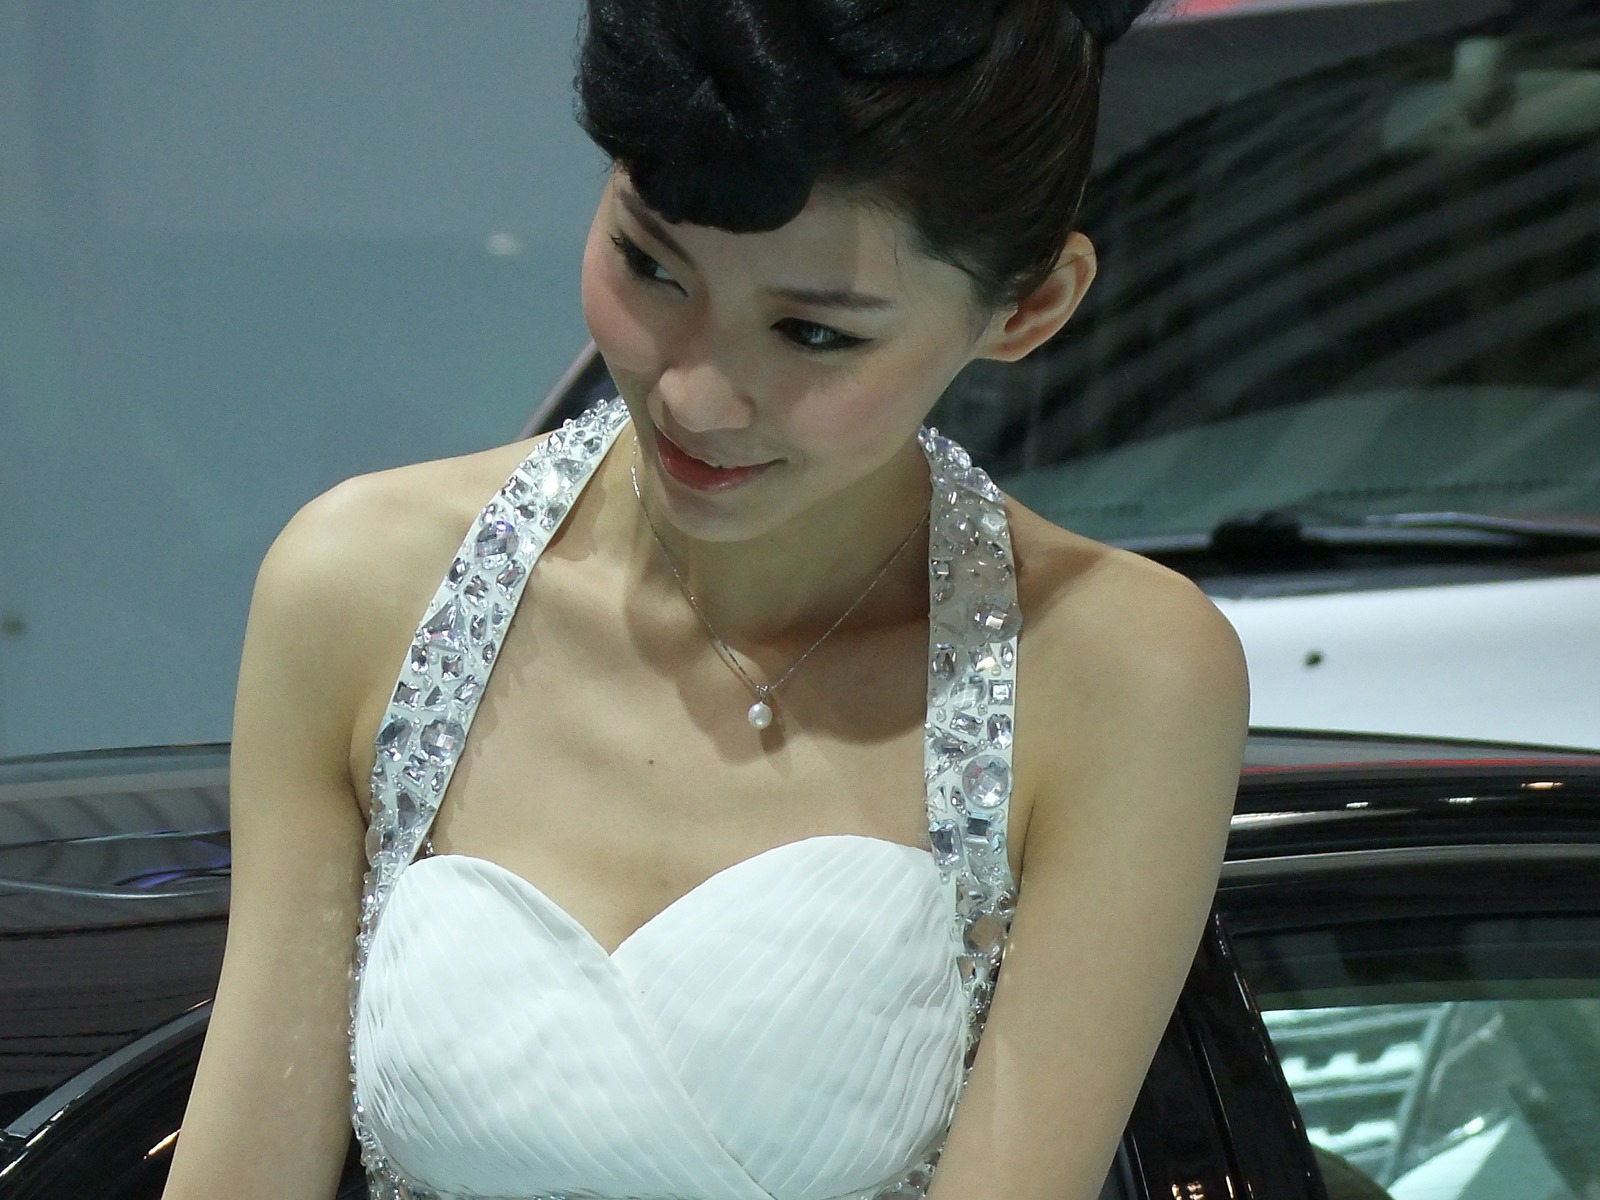 2010 Beijing Auto Show car models Collection (2) #1 - 1600x1200